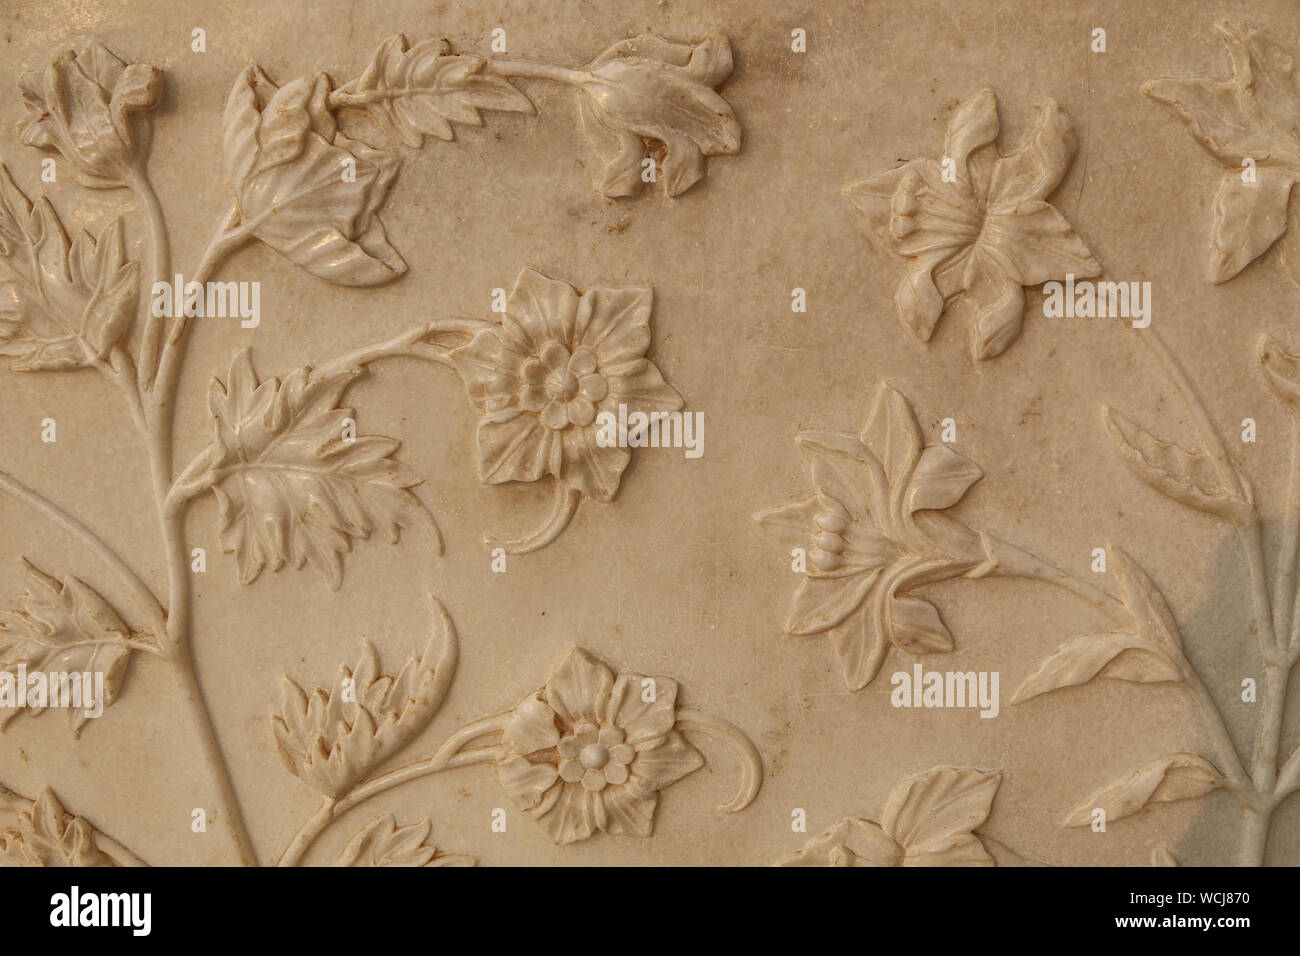 Exquisite close up of the marble floral carvngs at the Taj Mahal, Agra, Uttar Pradesh, India, Central Asia Stock Photo